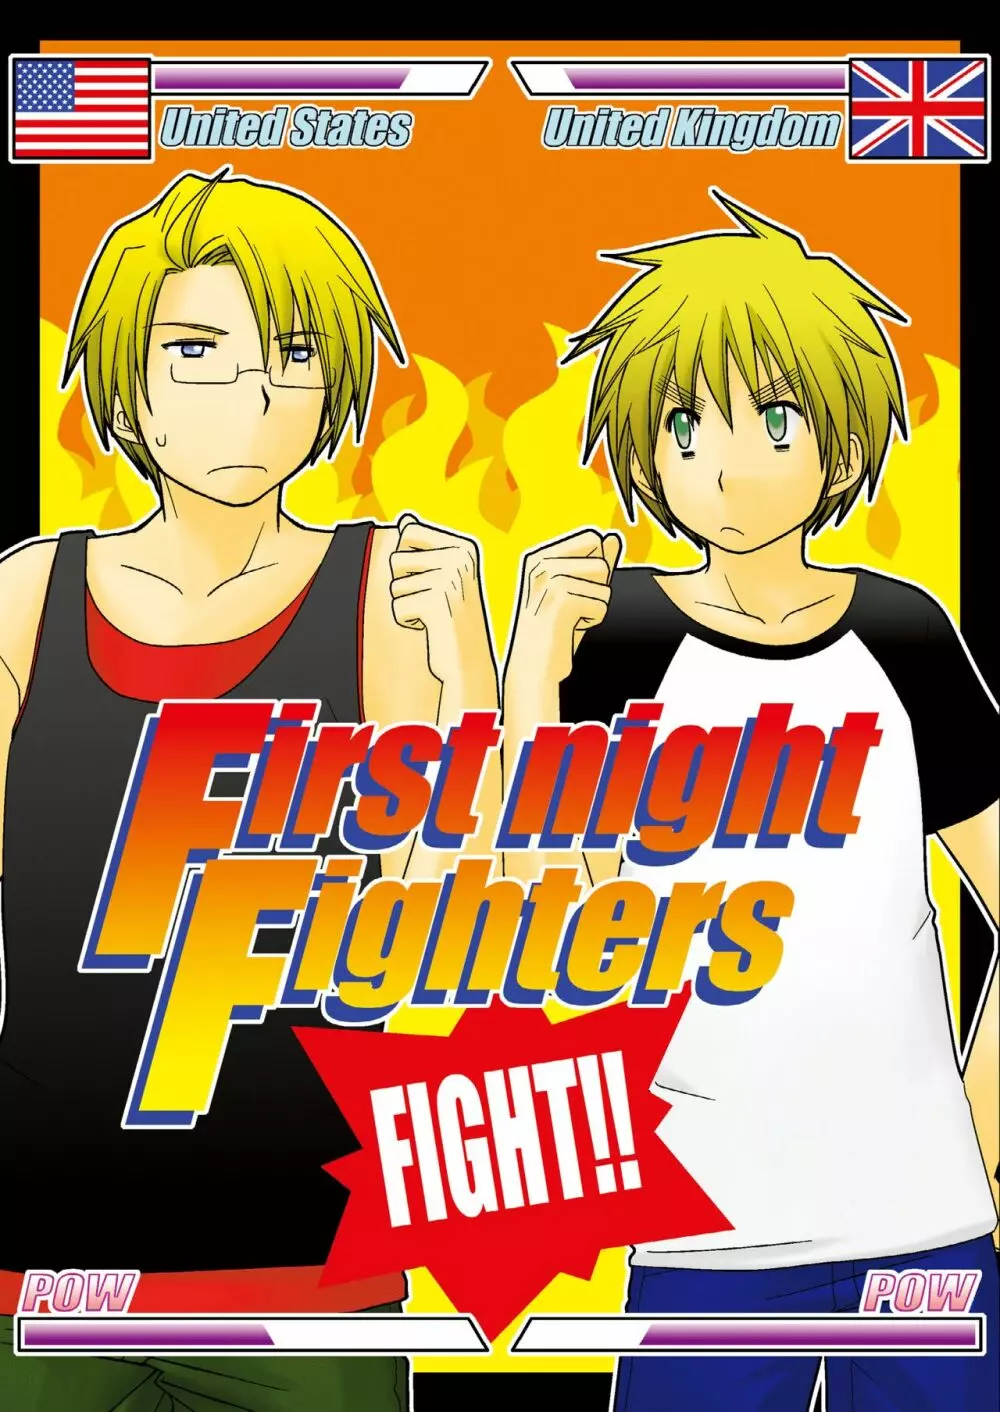 FIrst night Fighters